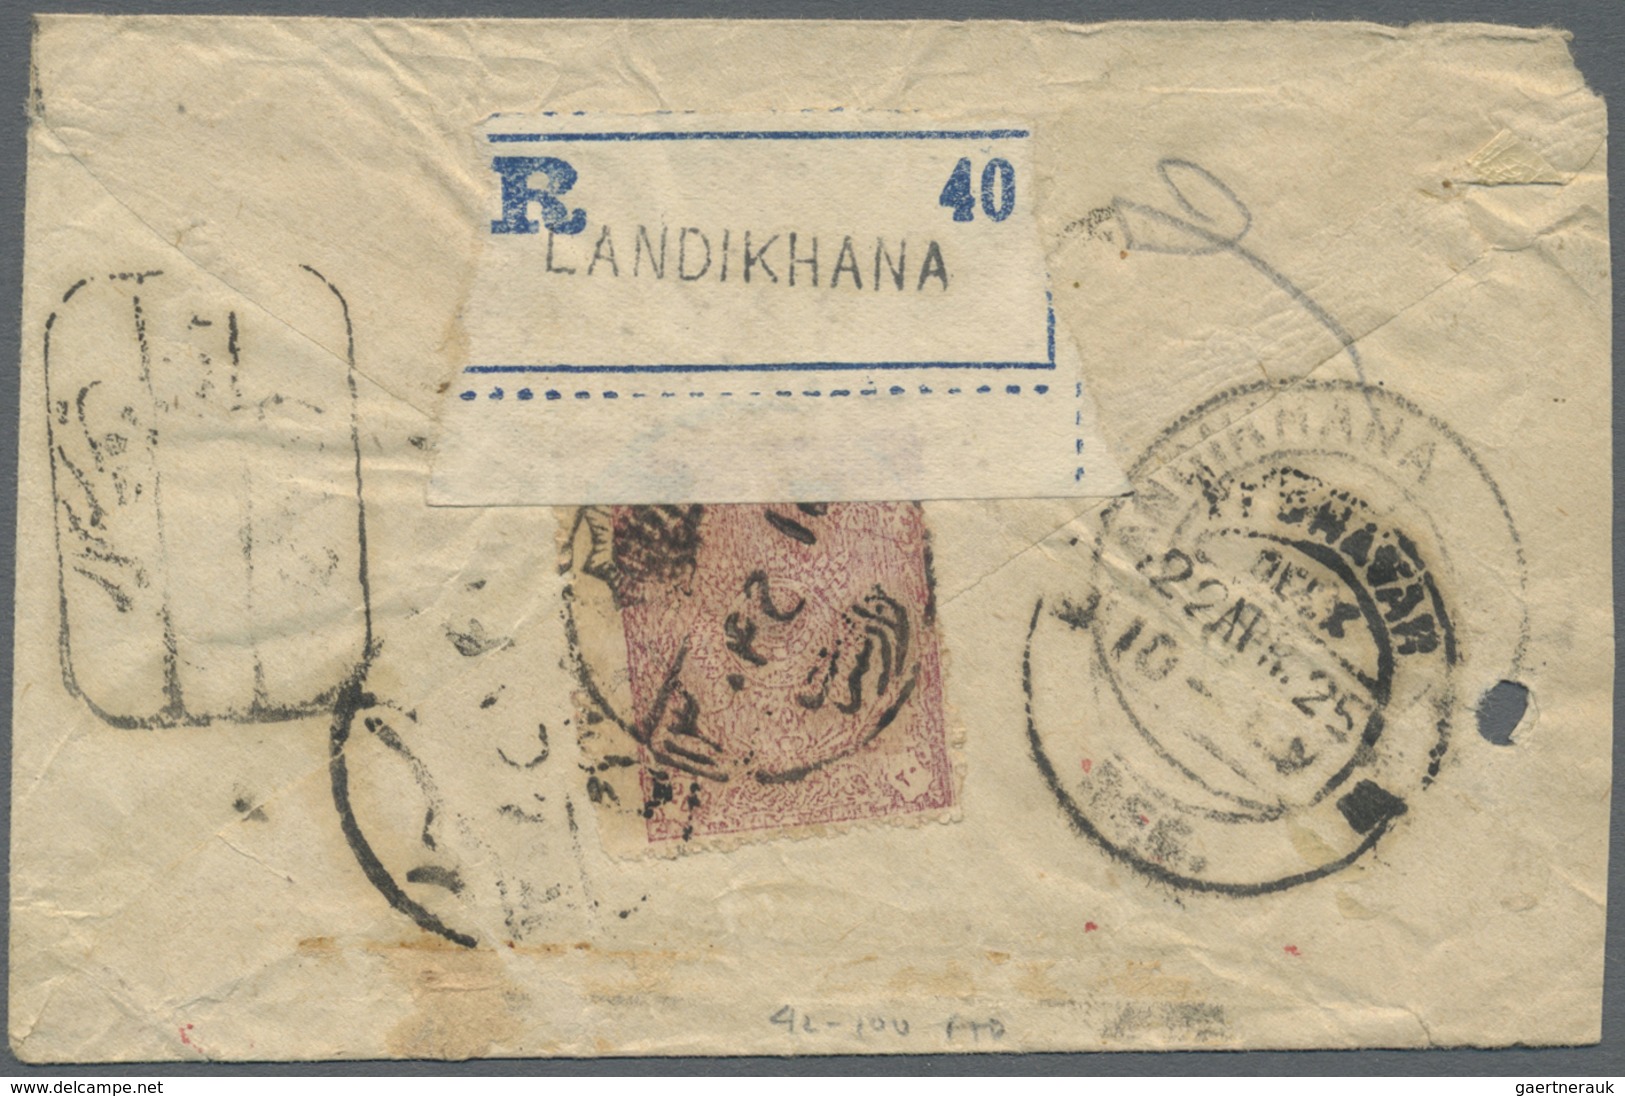 Br Afghanistan: 1909-1928: Collection of 19 pre-UPU covers to India, from the Kabul region via the nort